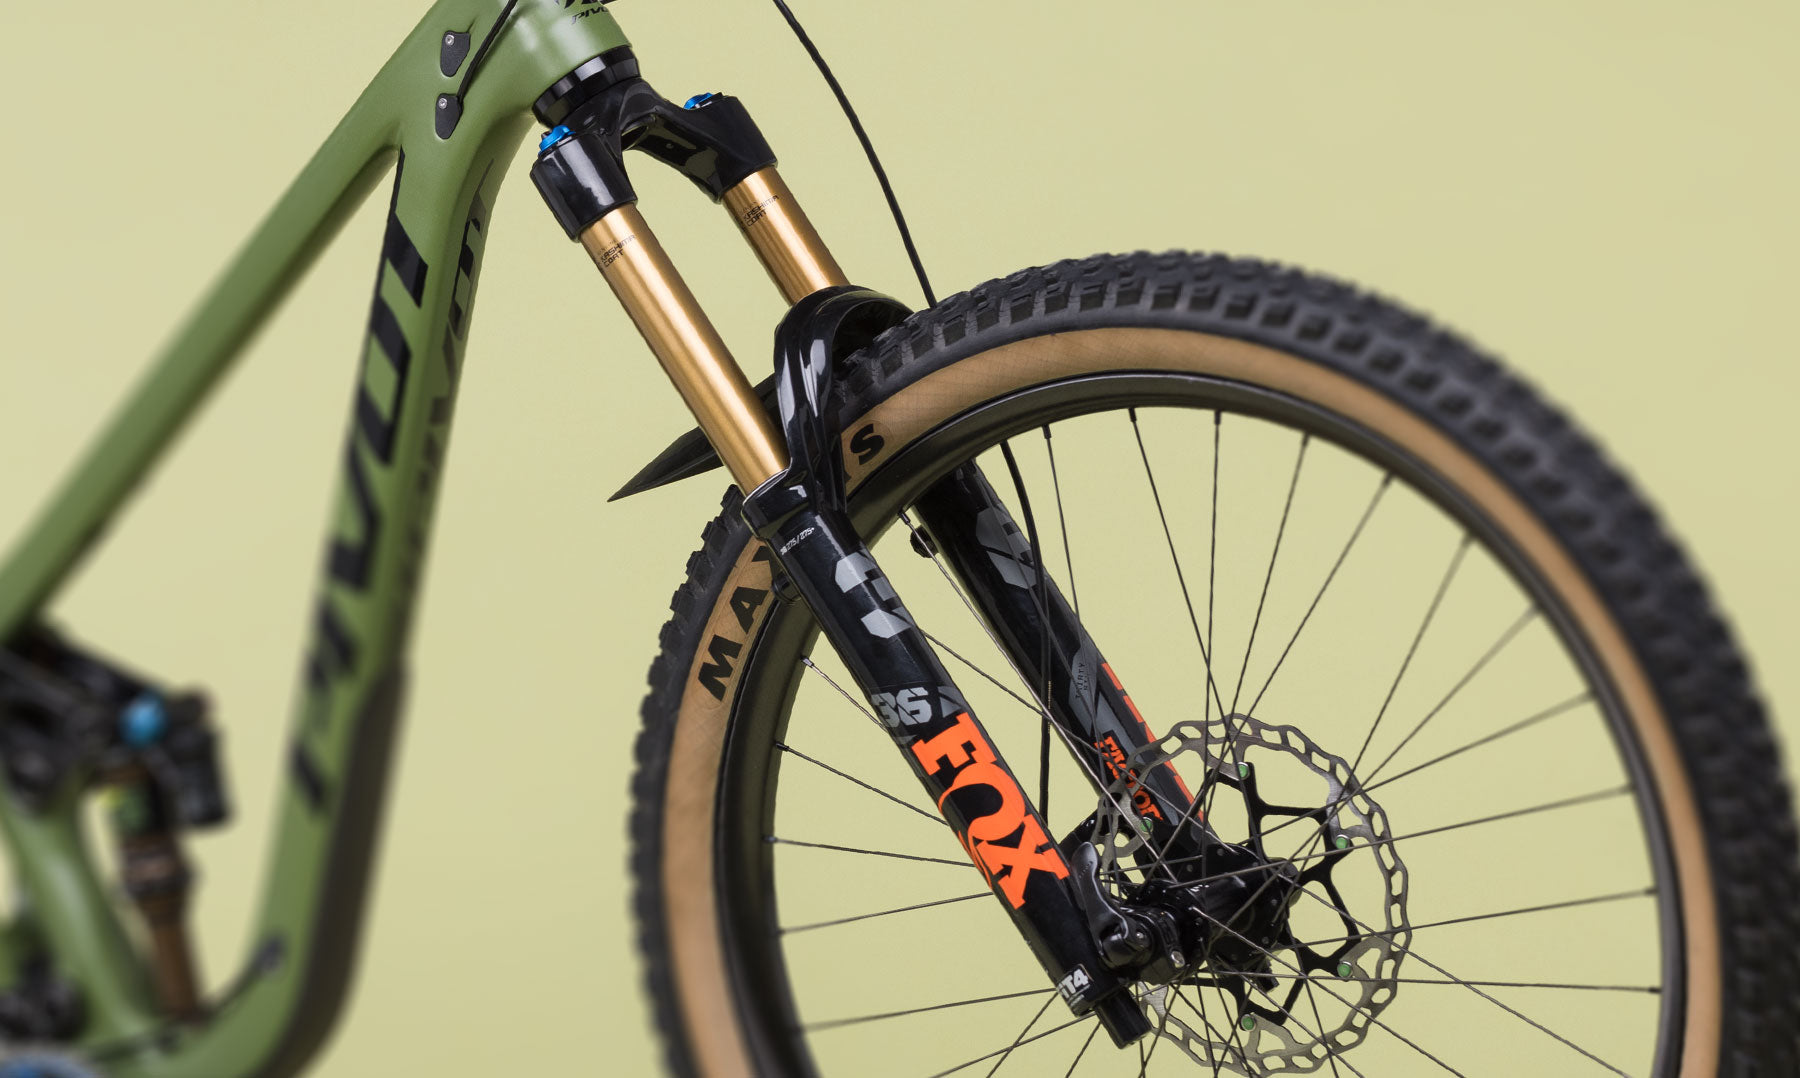 Puerto marítimo Motel Ascensor FOX MTB Fork Buyer's Guide | The Pro's Closet